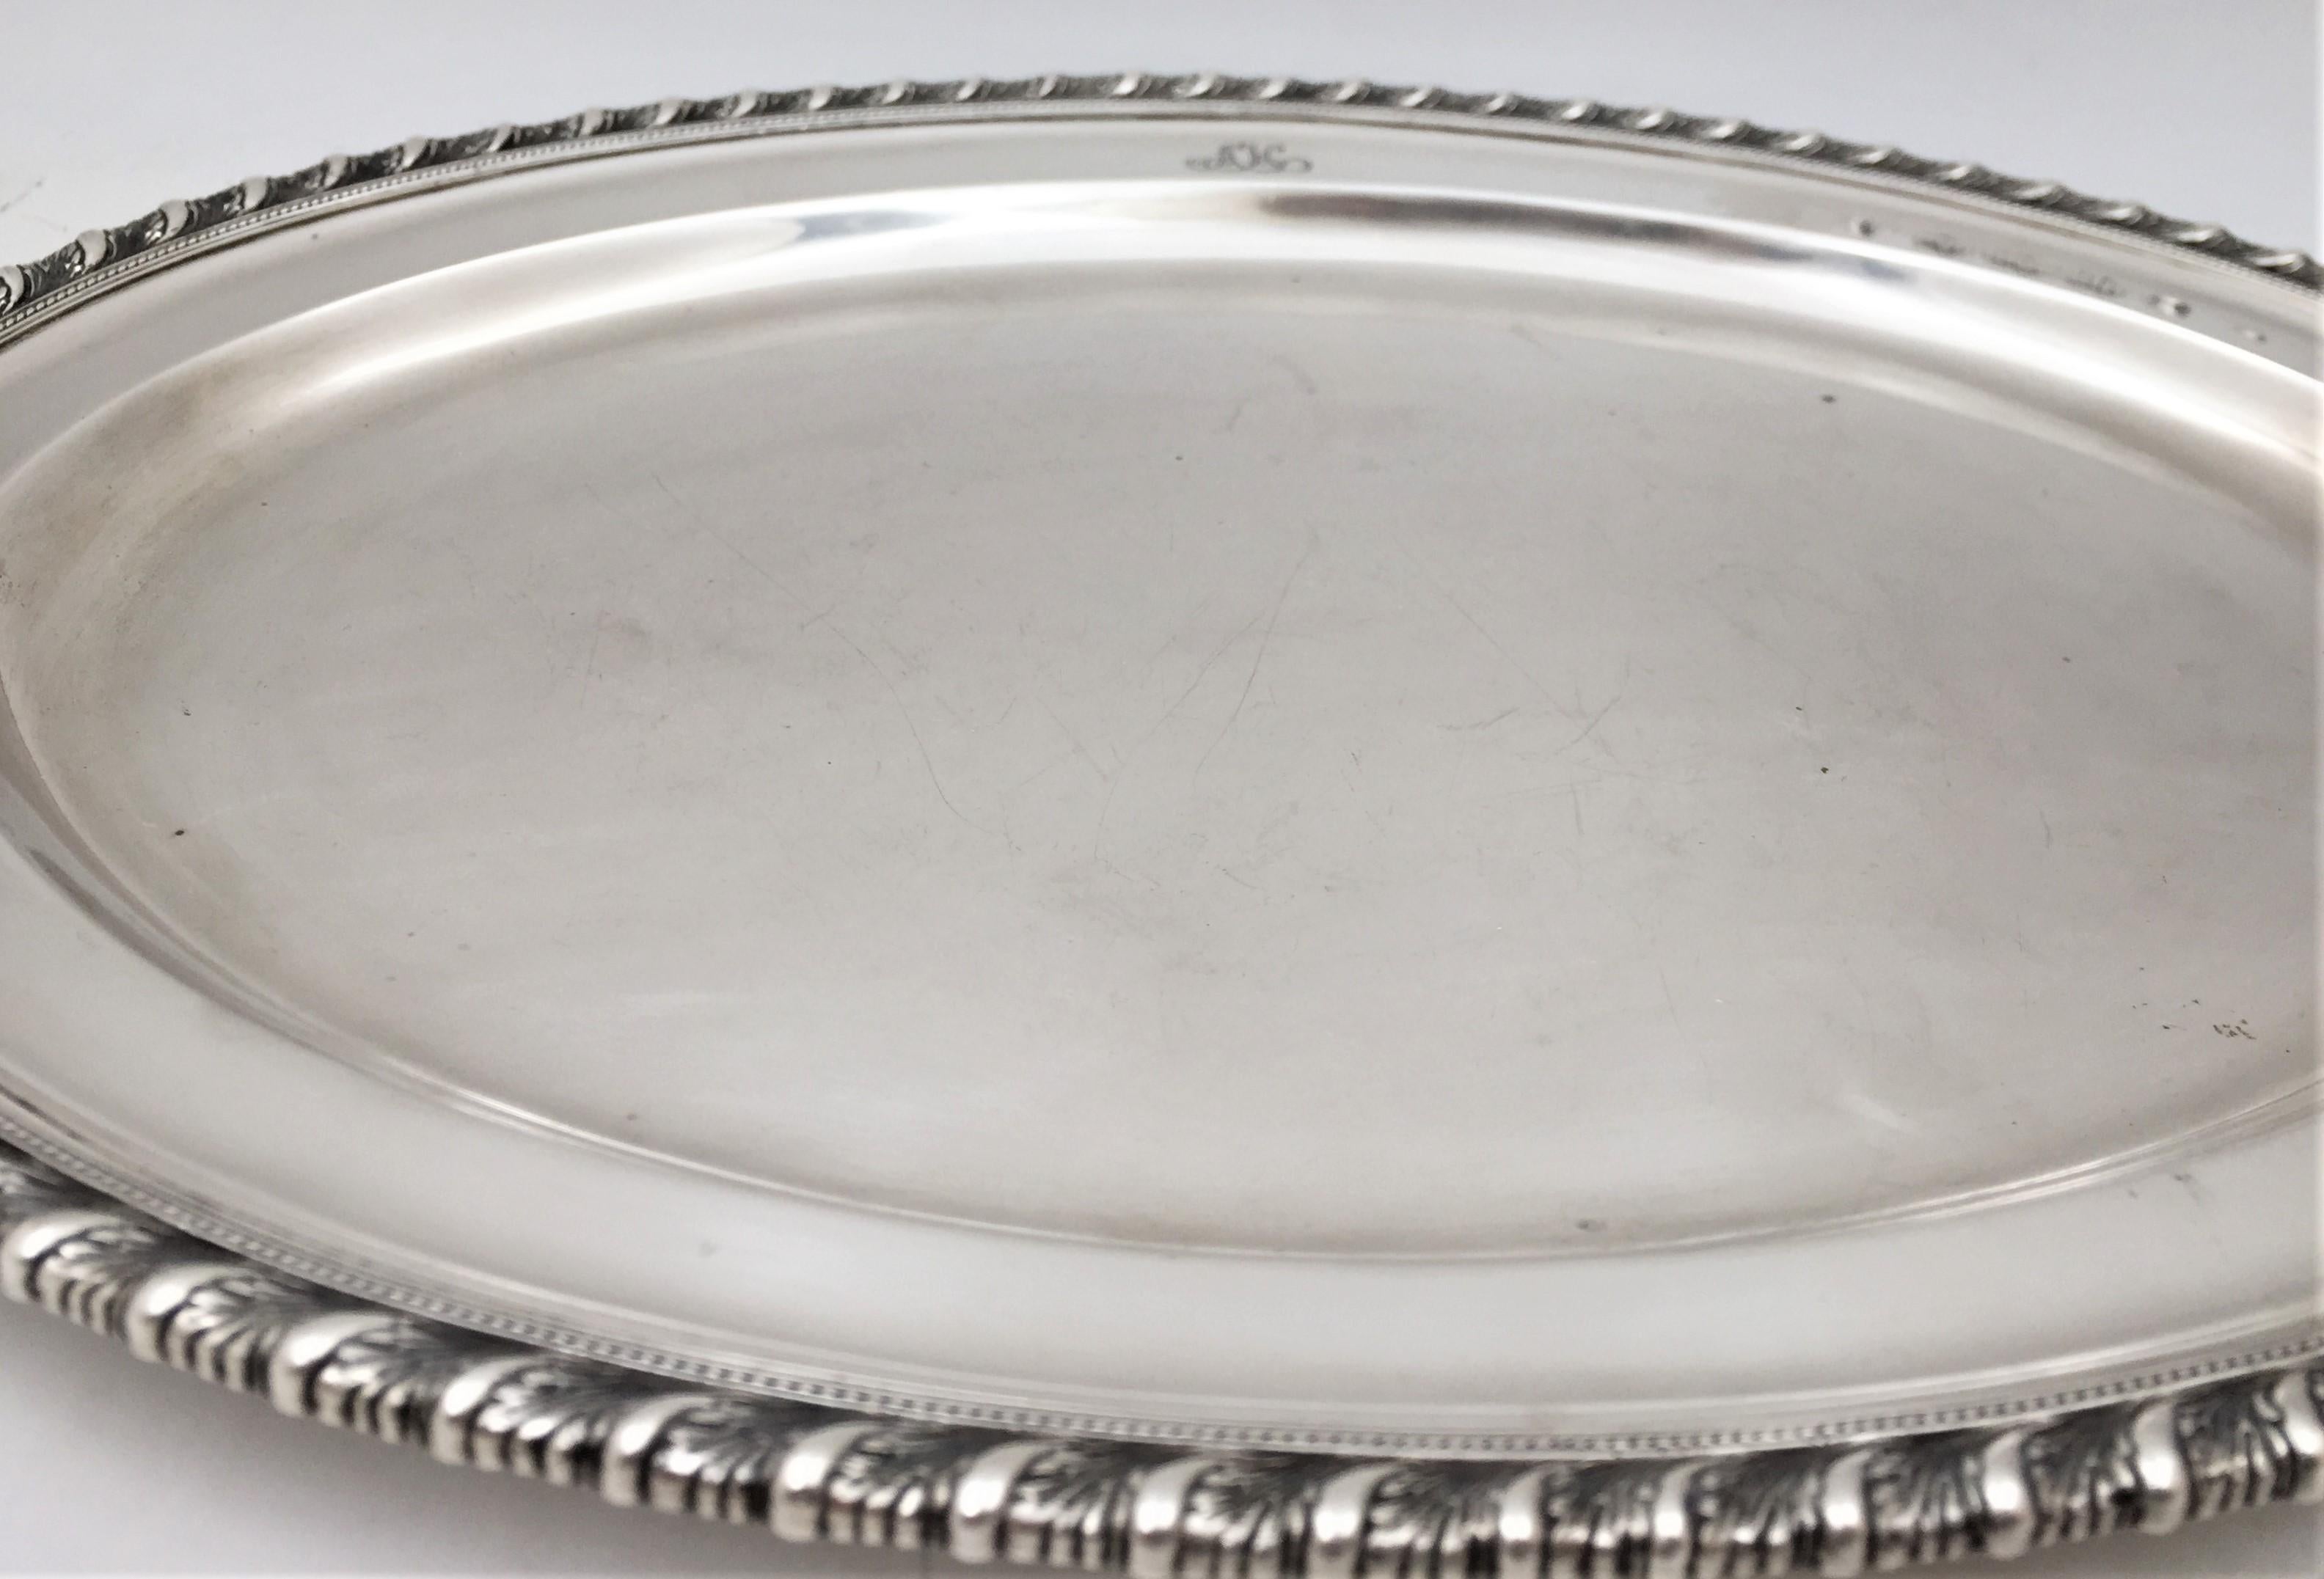 American Tiffany & Co. Sterling Silver 1921 Tray with Rope Border